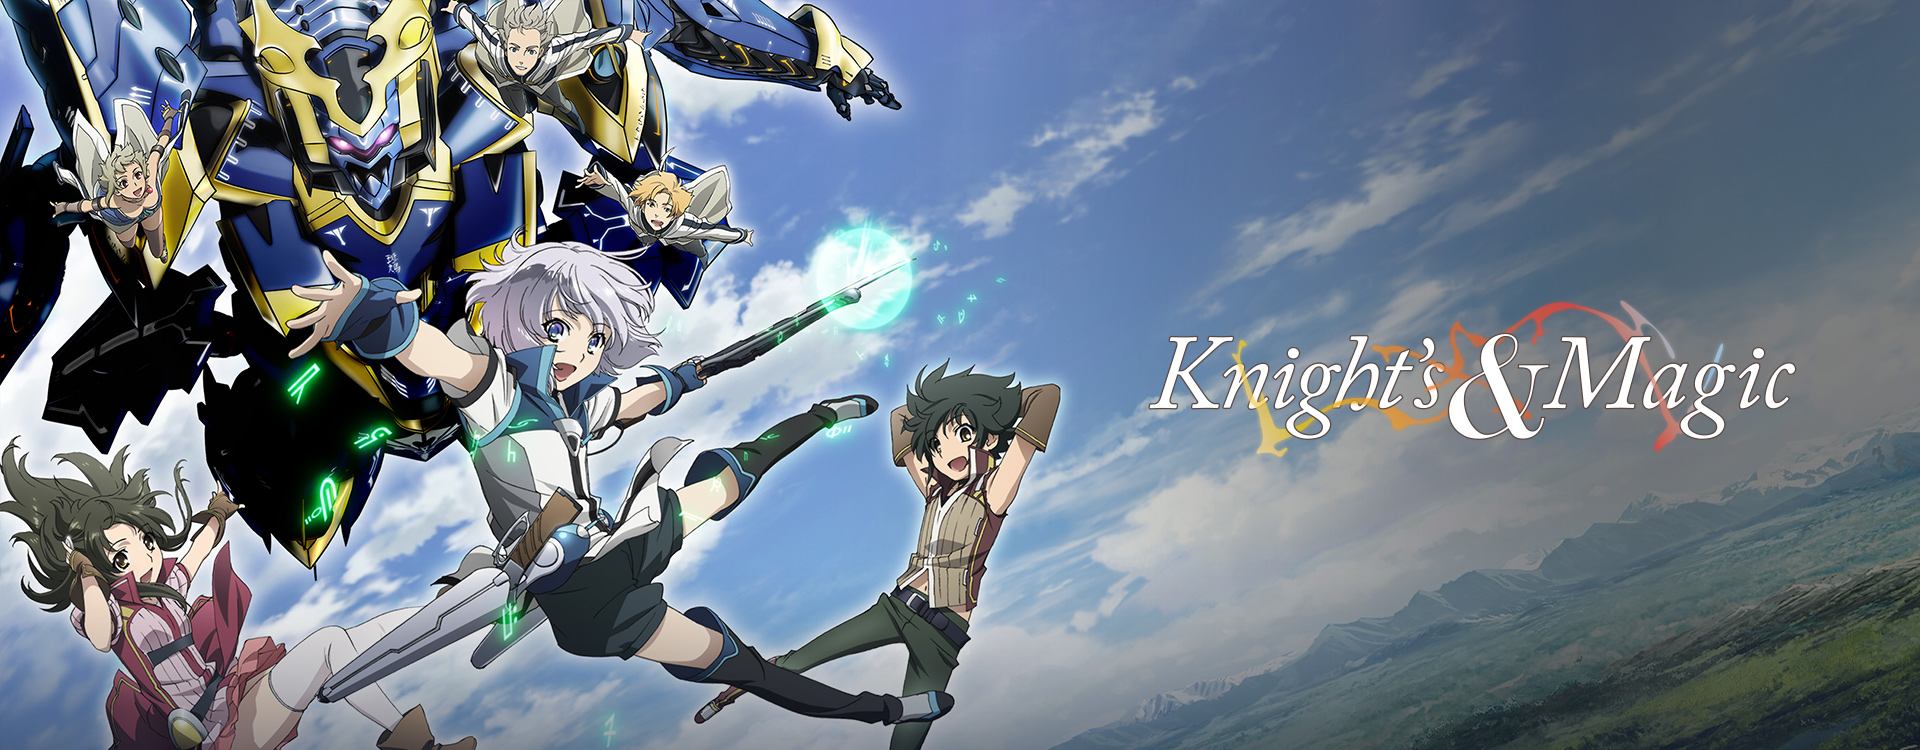 Watch Knight S Magic Sub Dub Action Adventure Fantasy Sci Fi Anime Funimation After rigorously training for three years, the ordinary saitama has gained immense strength which allows him to take out anyone and anything with just one punch. watch knight s magic sub dub